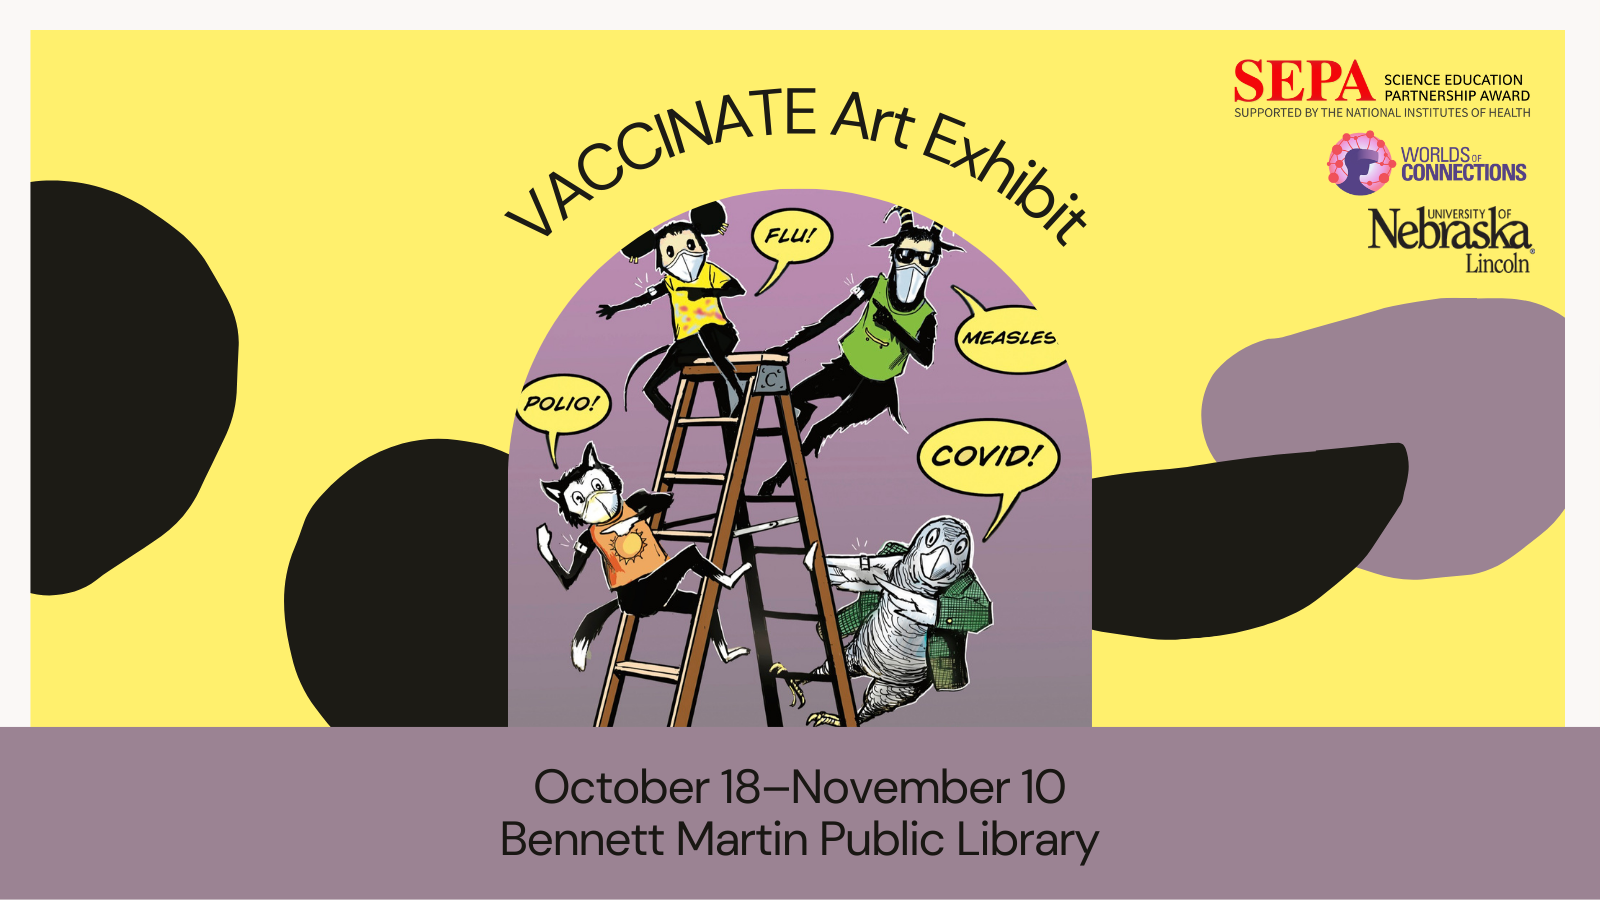 http://worldsofconnections.com/covid-vaccine-posters/